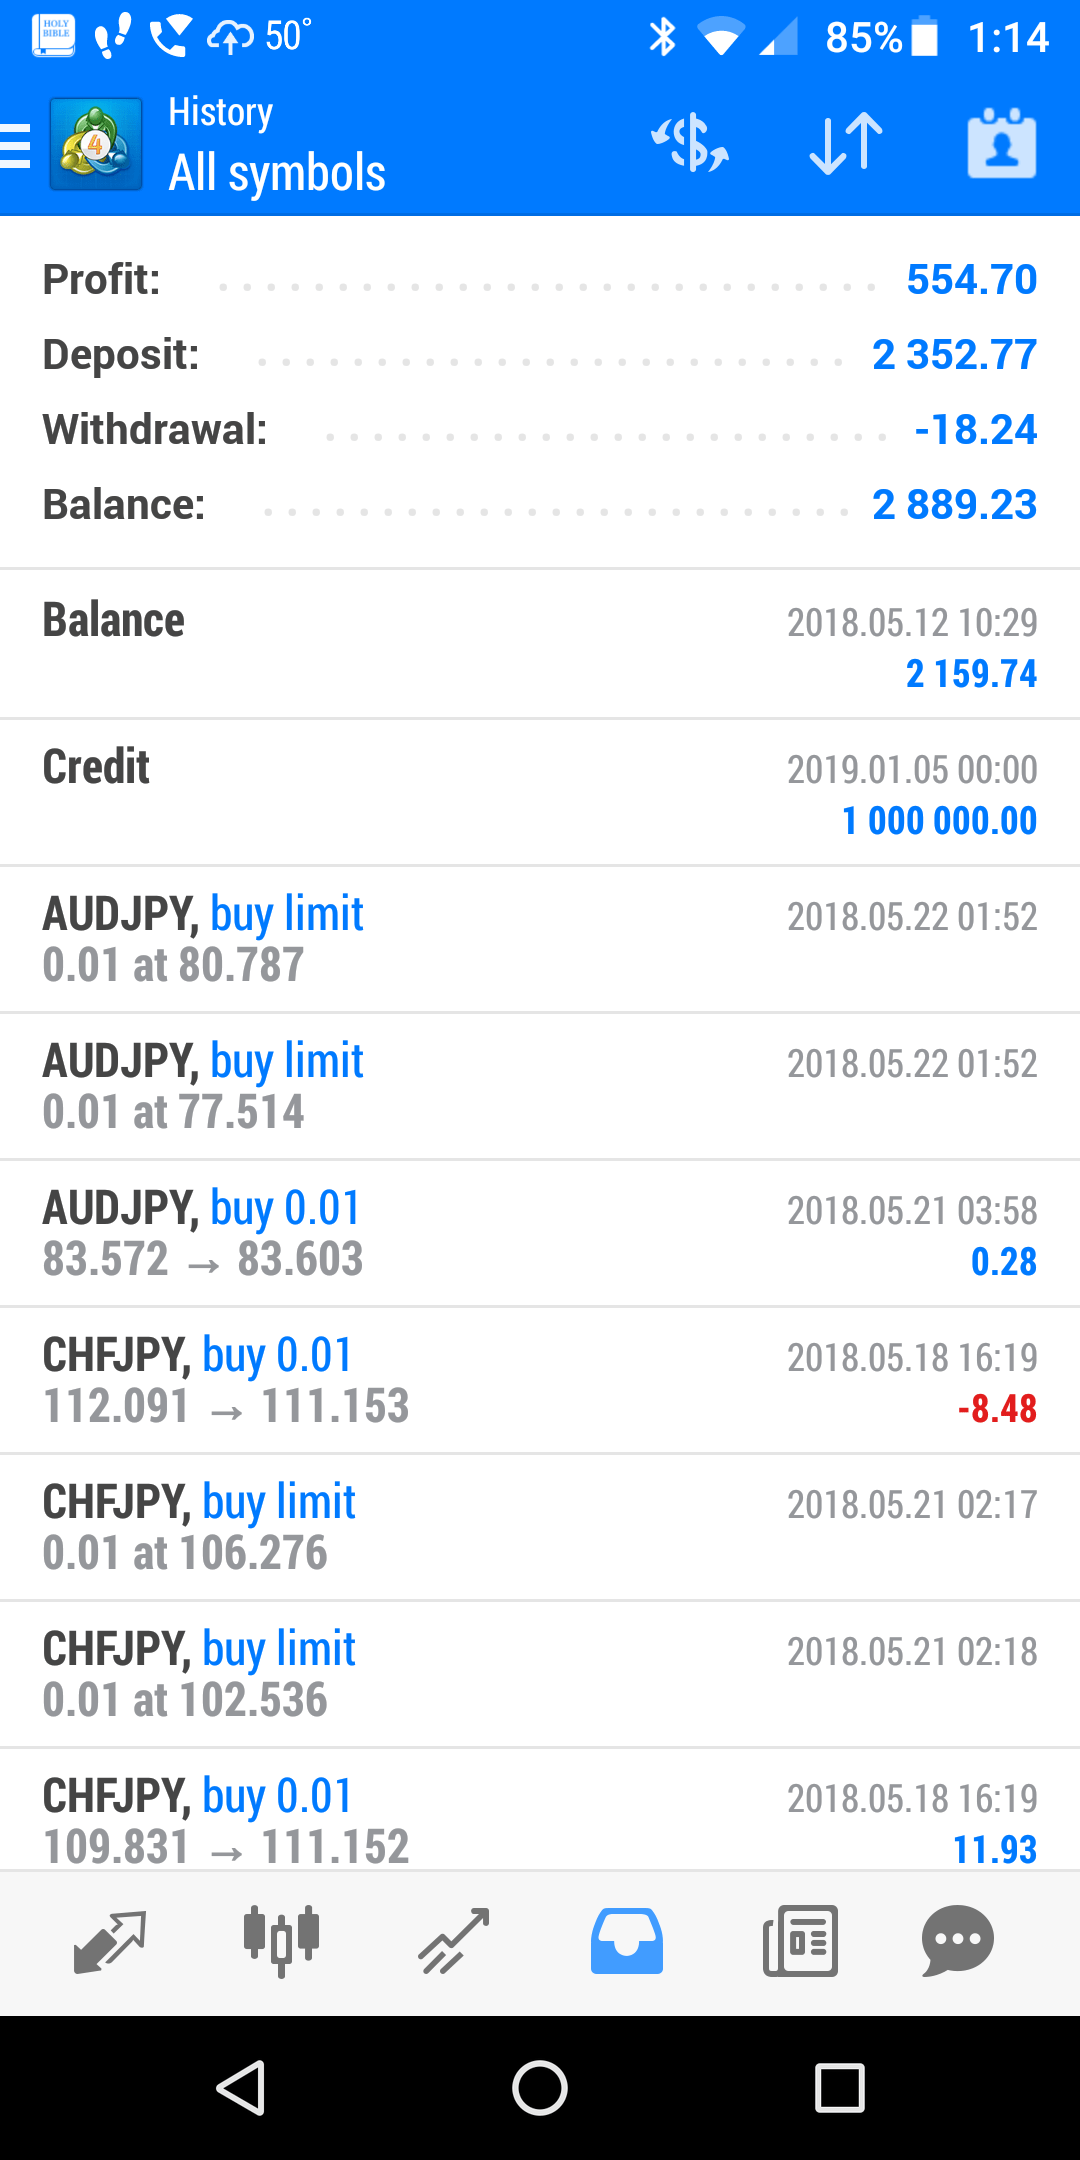 2018 Forex Results - How Did I Do For The Year? Gain or Loss?